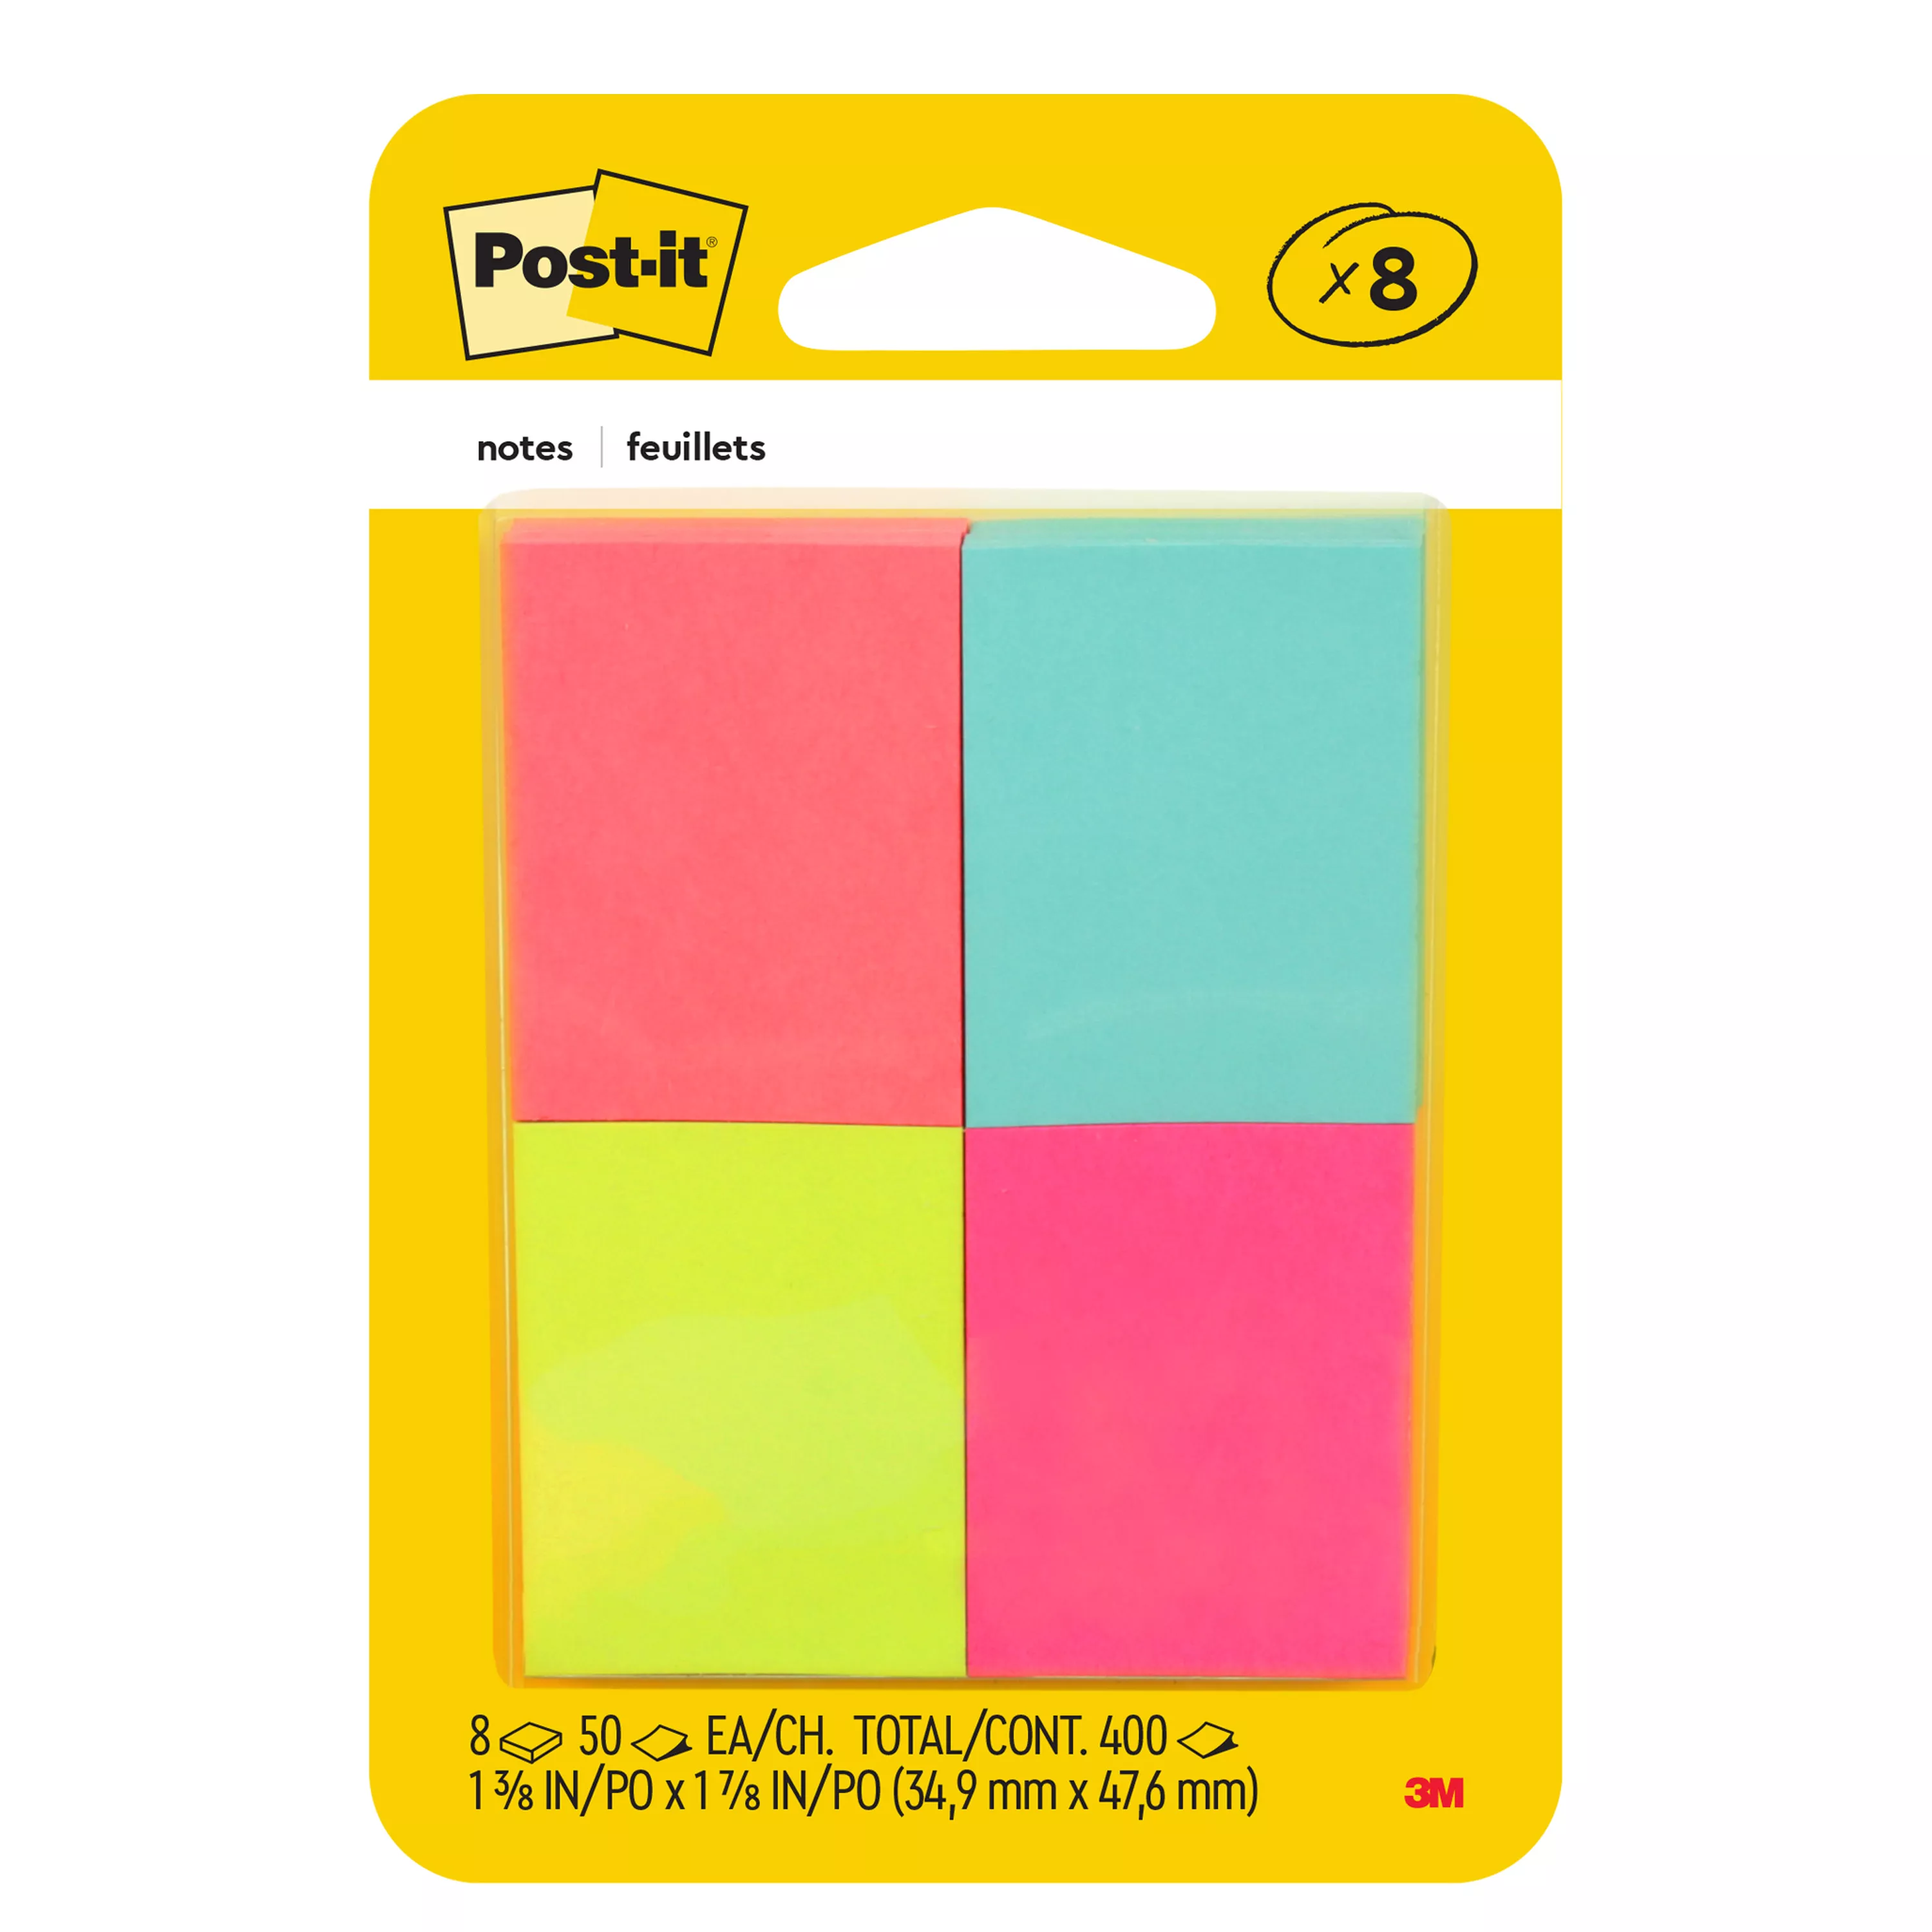 Post-it® Notes 653-8AF, 1-3/8 in x 1-7/8 in (34,9 mm x 47,6 mm) Capetown
colors